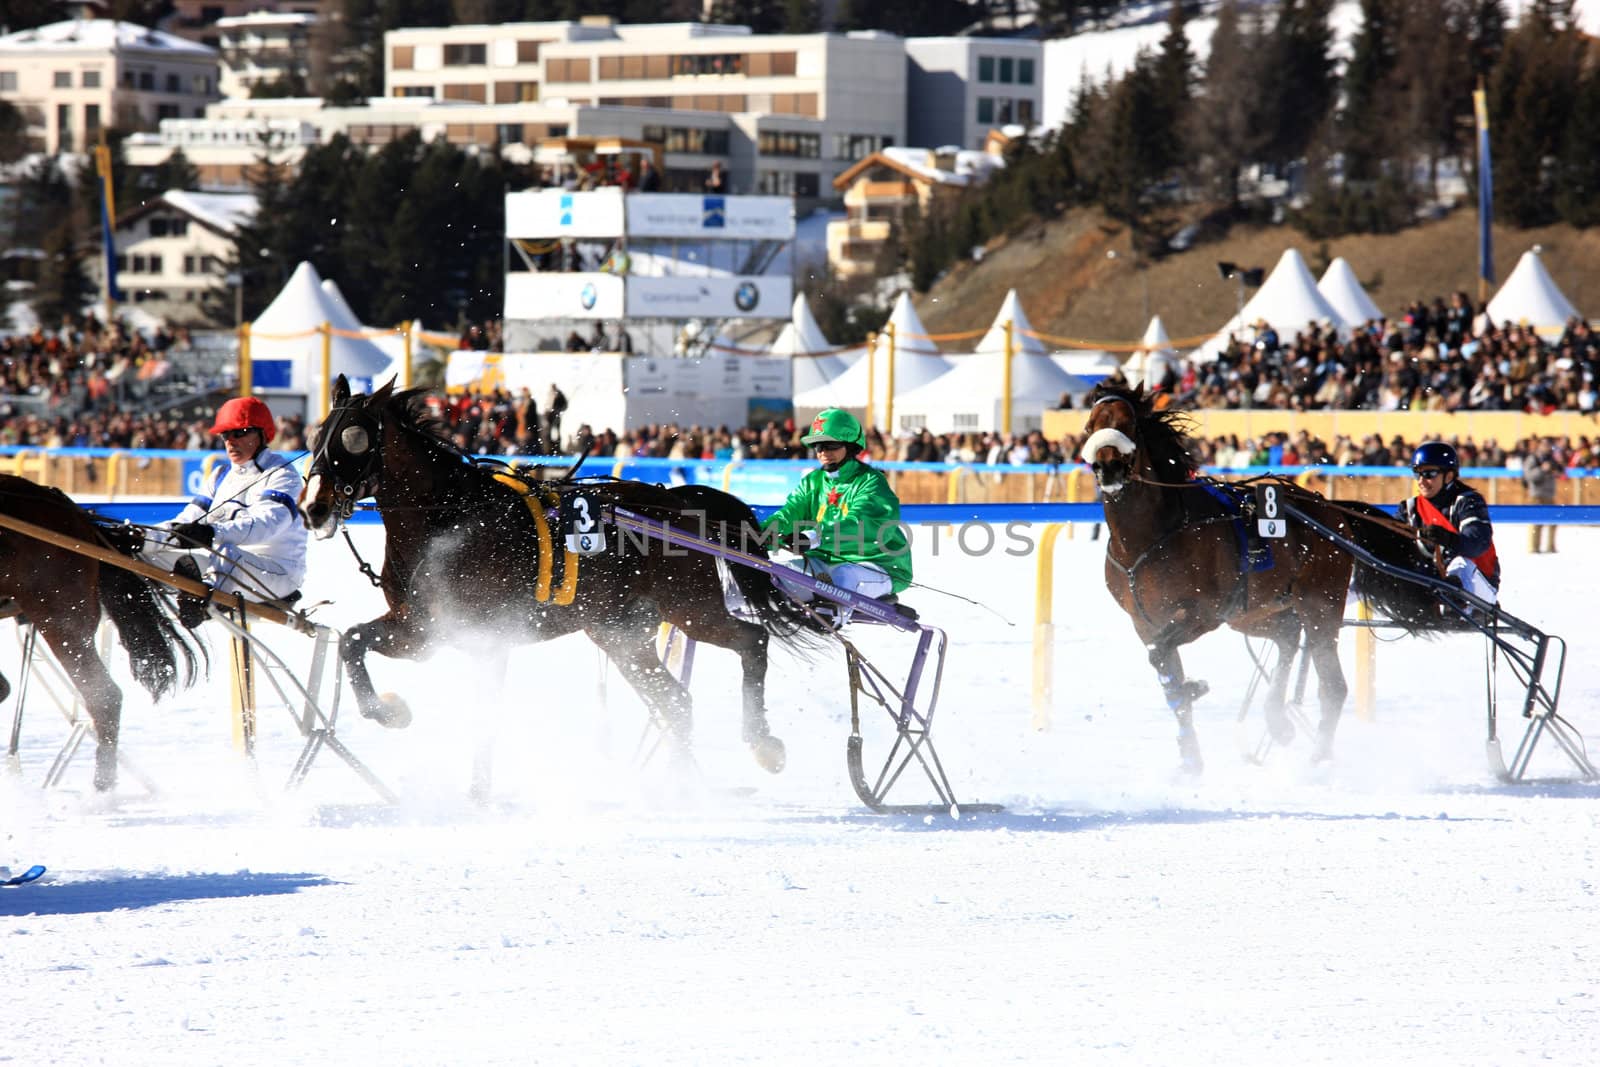 Trotting Race in the snow by monner